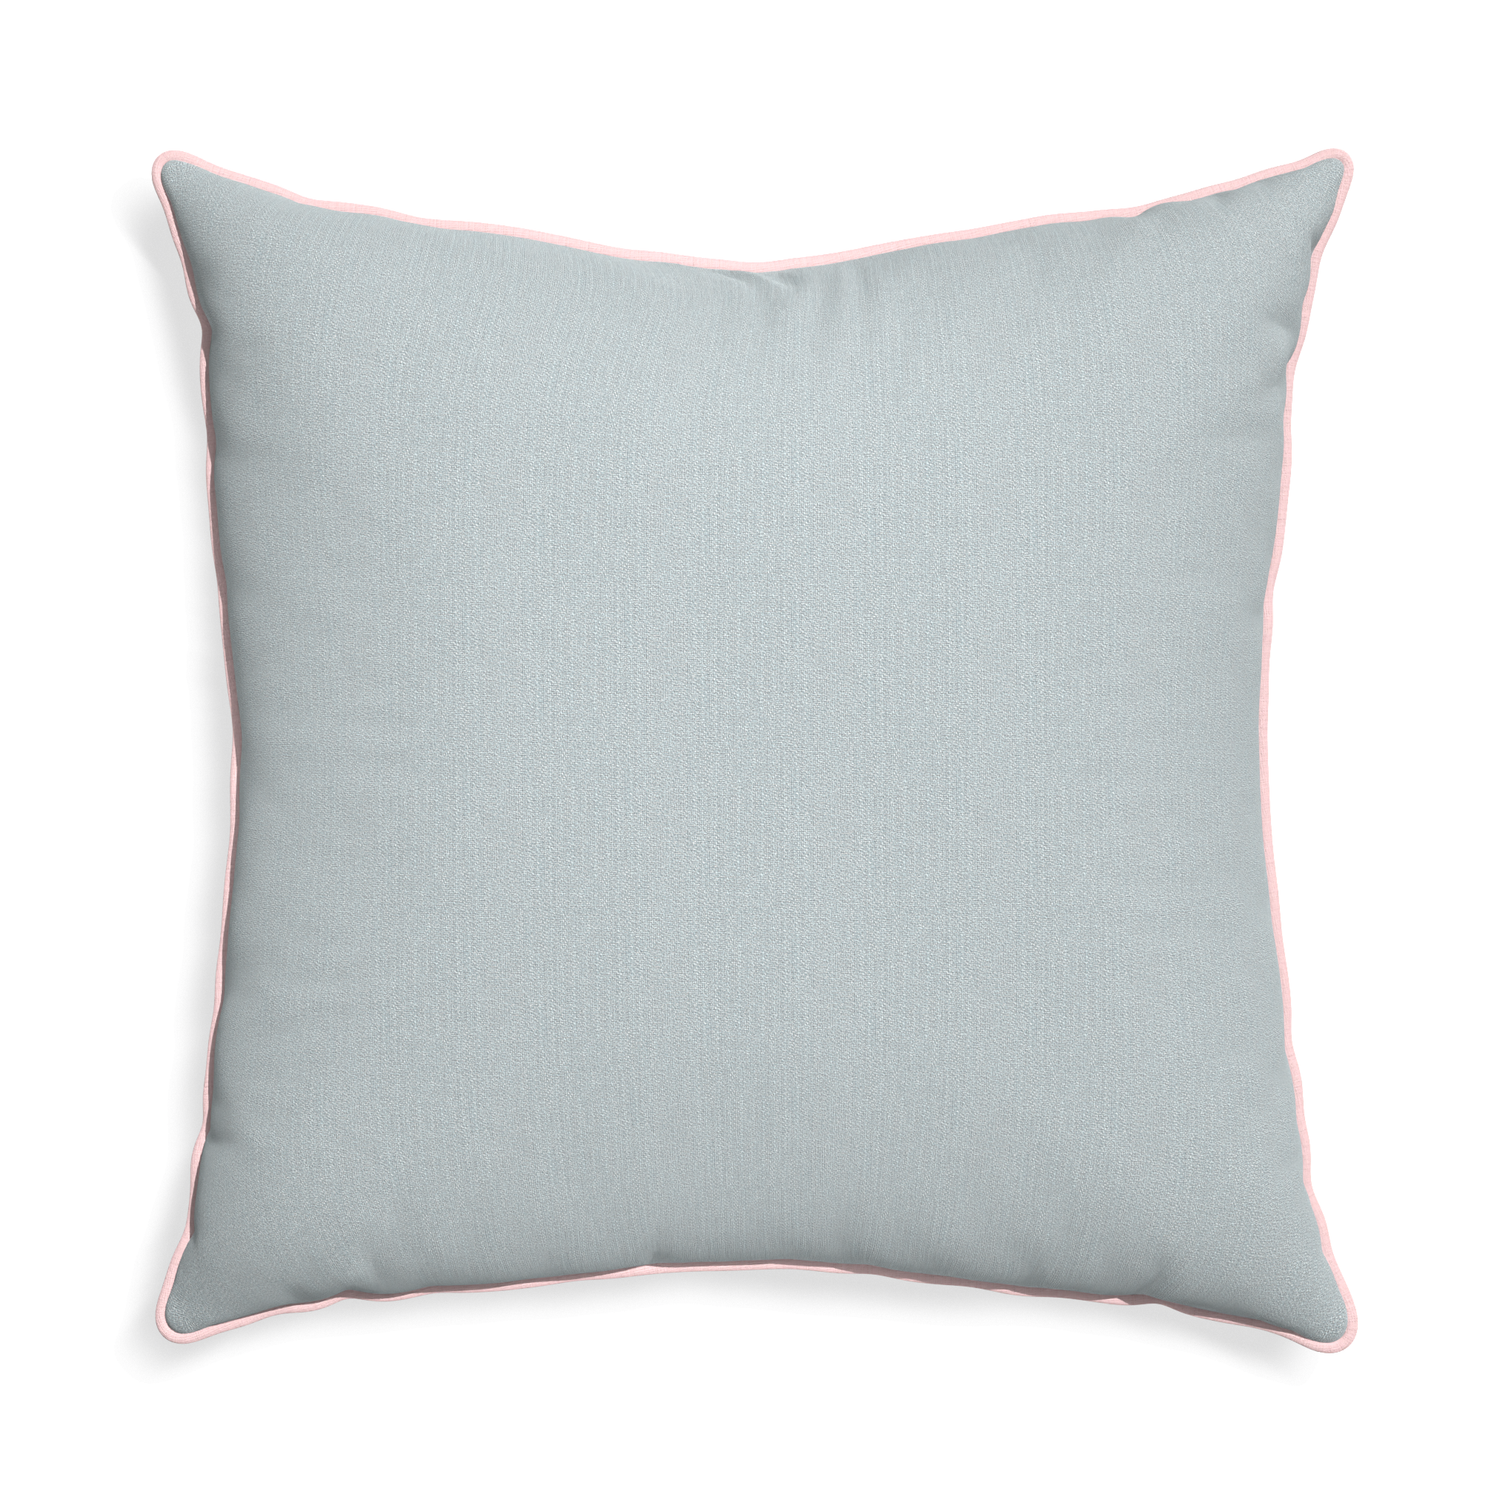 Euro-sham sea custom grey bluepillow with petal piping on white background